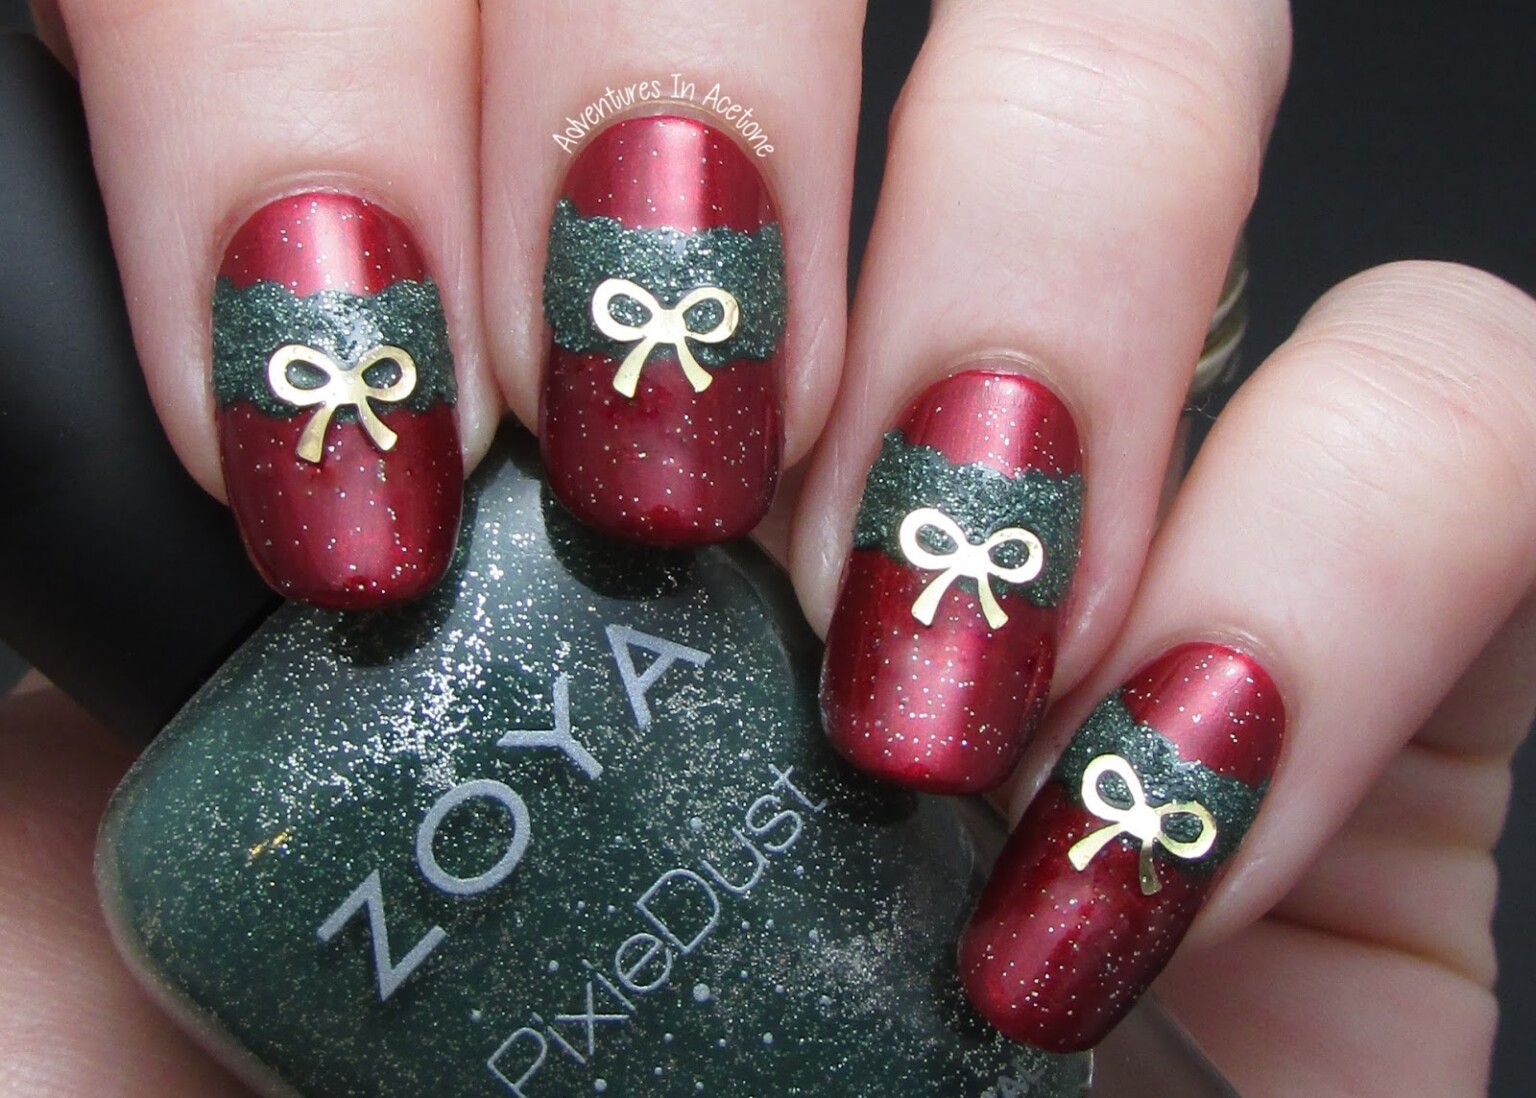 9. "Sparkly Glitter Christmas Nail Designs" - wide 7